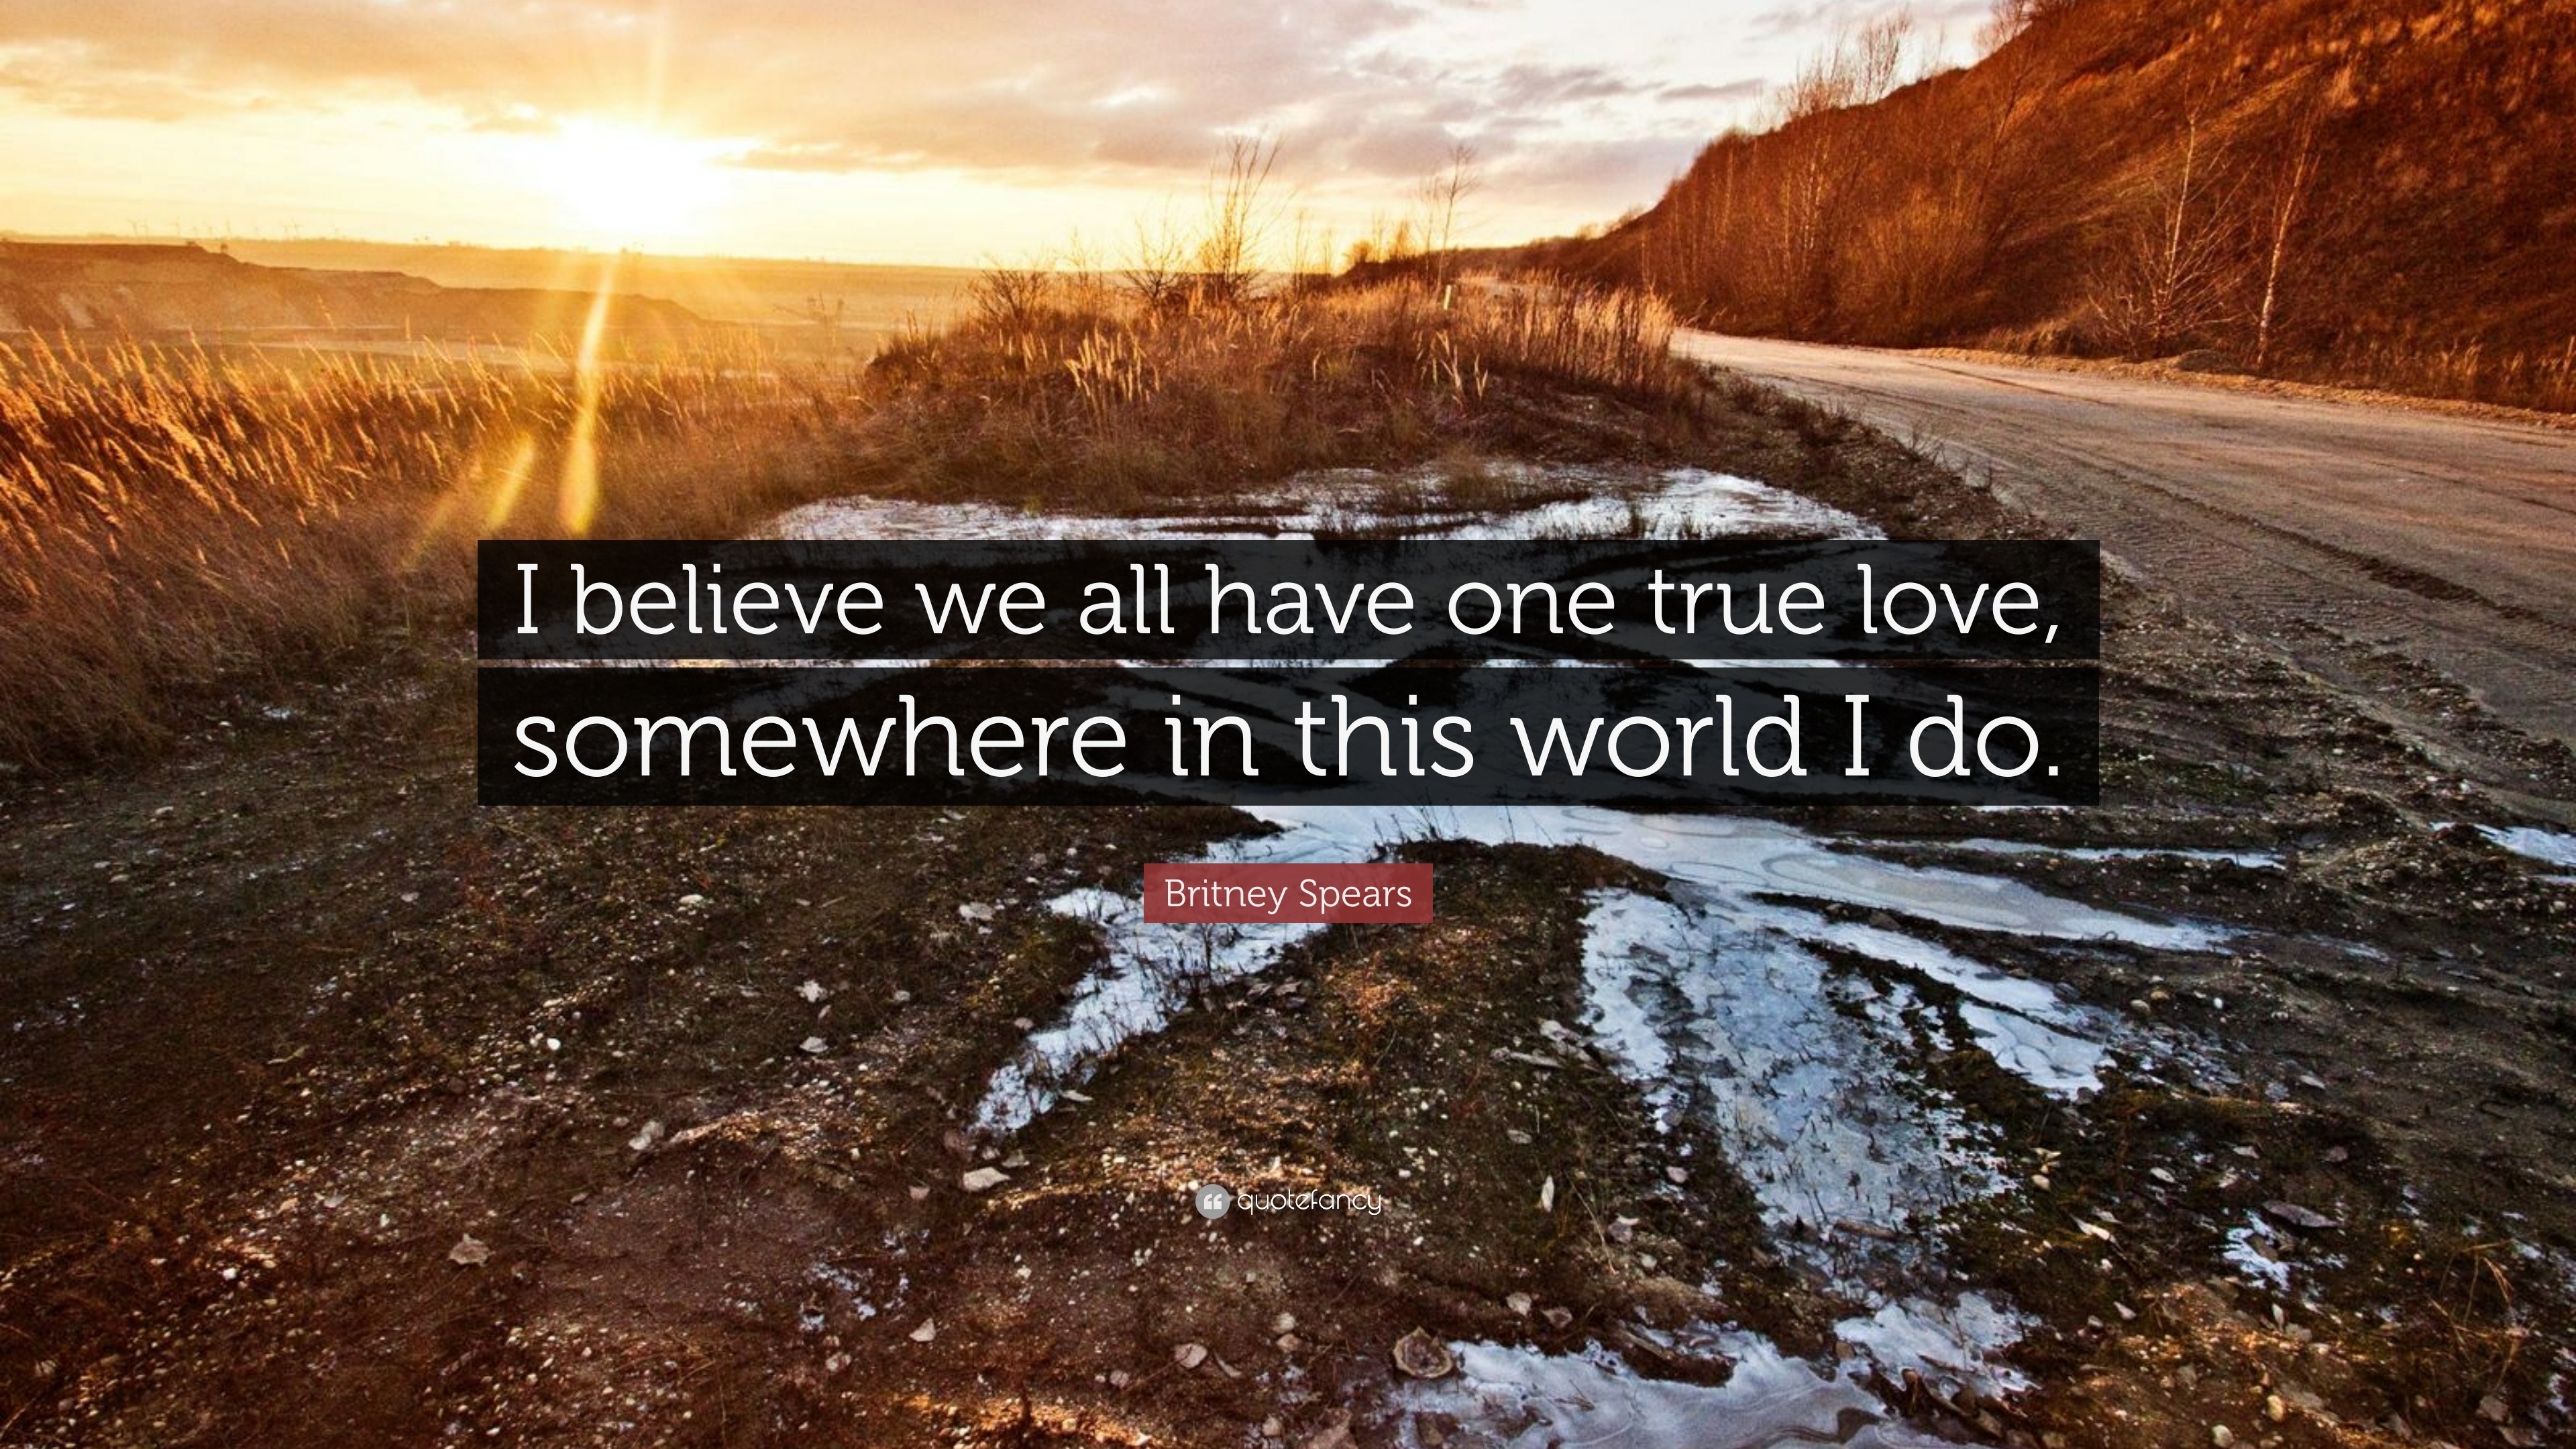 Britney Spears Quote “I believe we all have one true love somewhere in